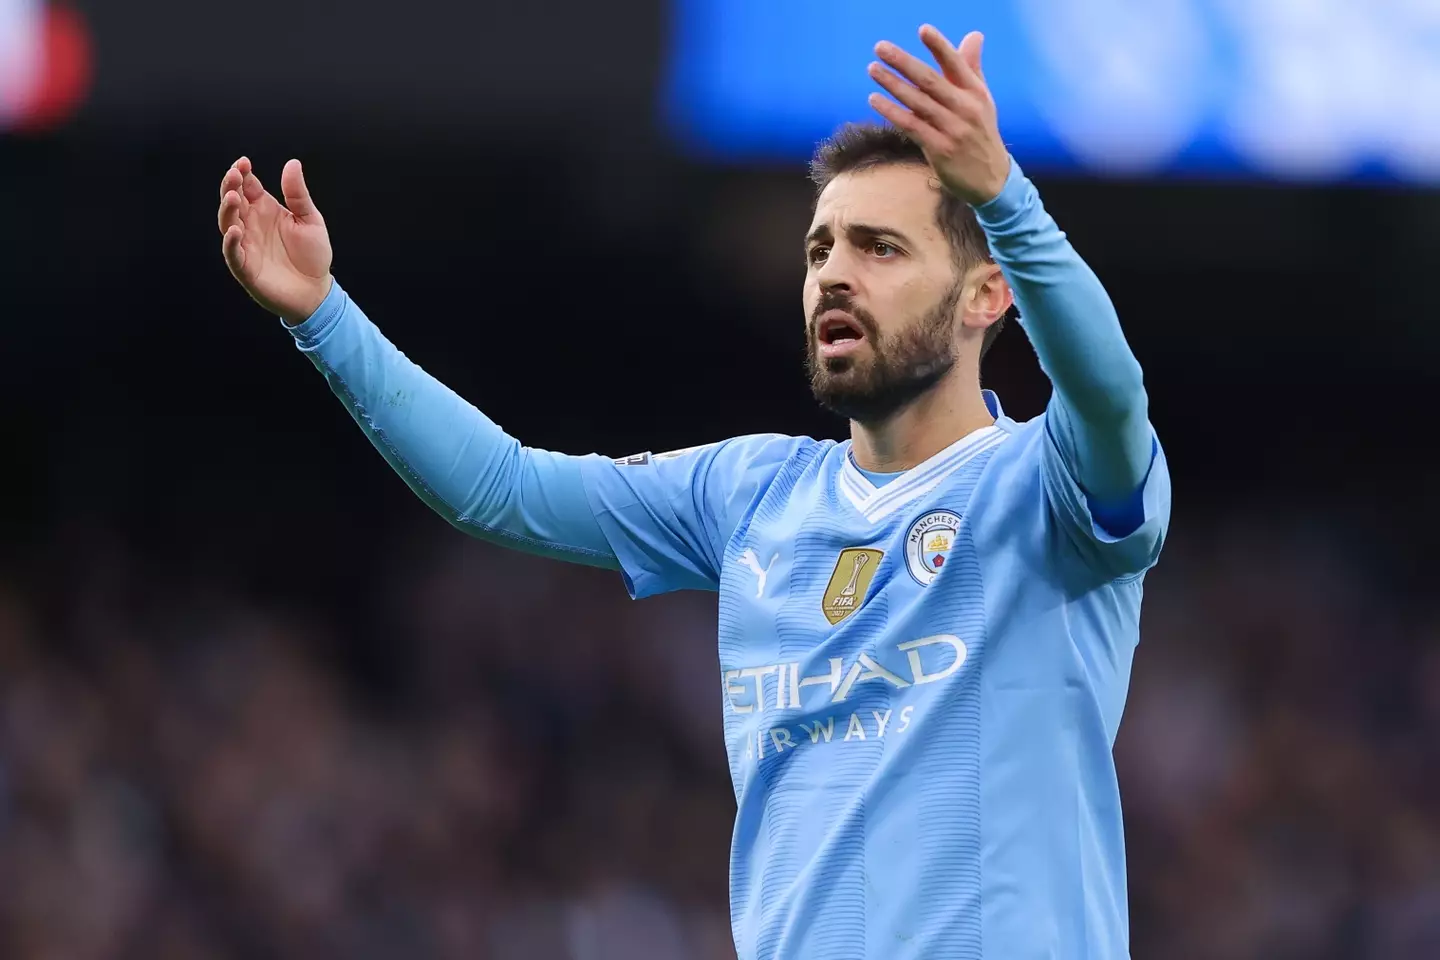 Bernardo Silva played a key role in City's defeat of United.